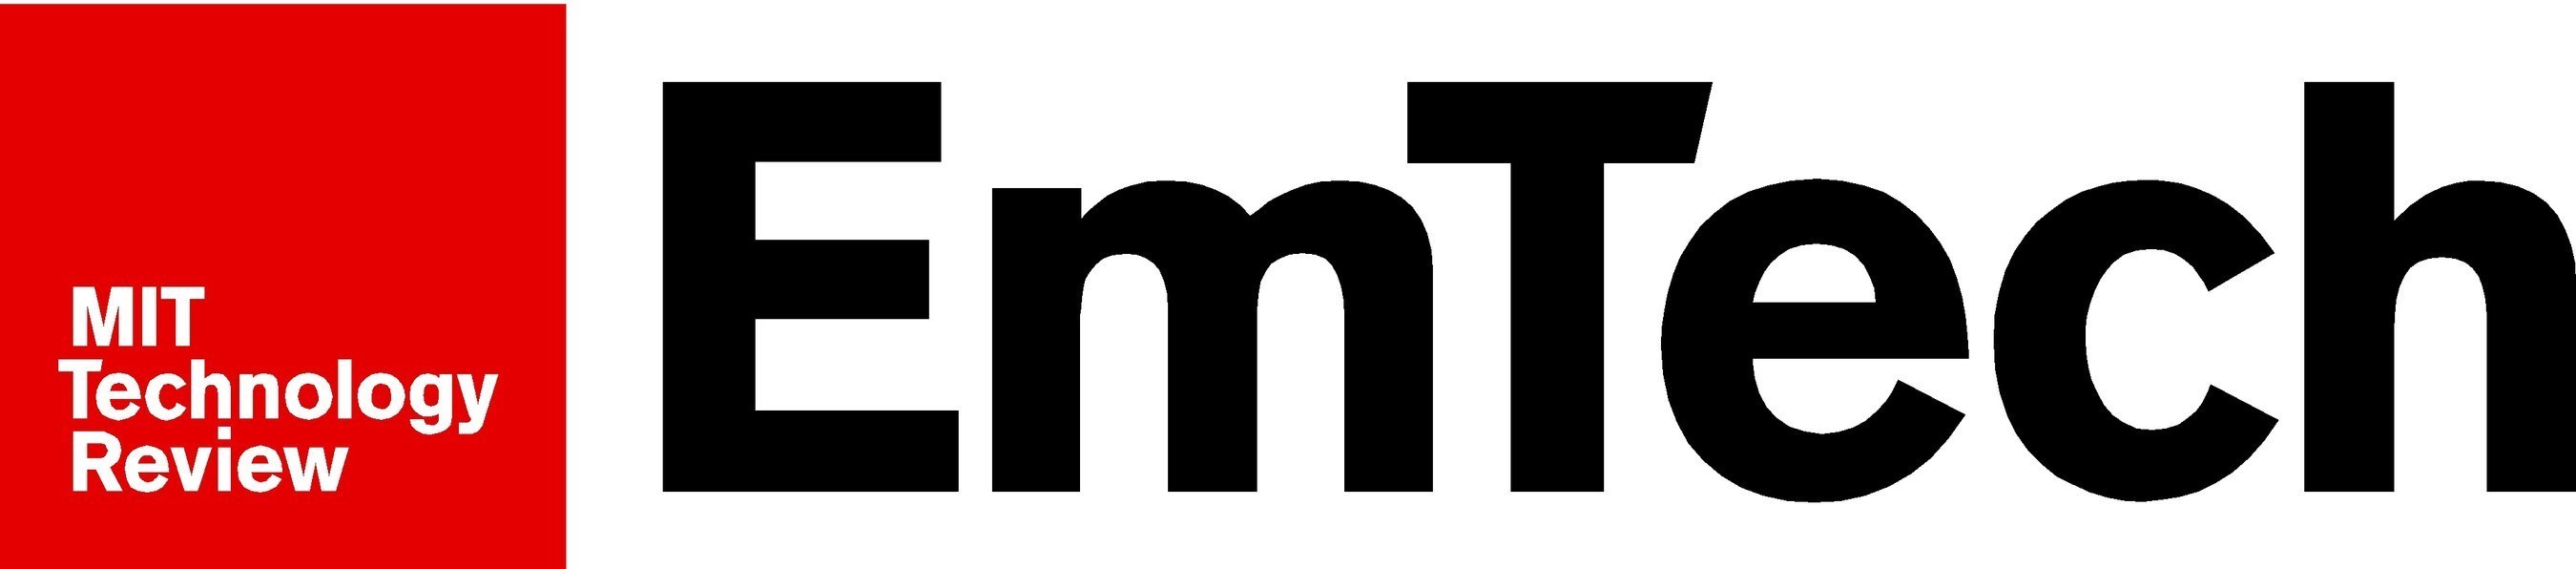 MIT Technology Review to host flagship EmTech event November 13